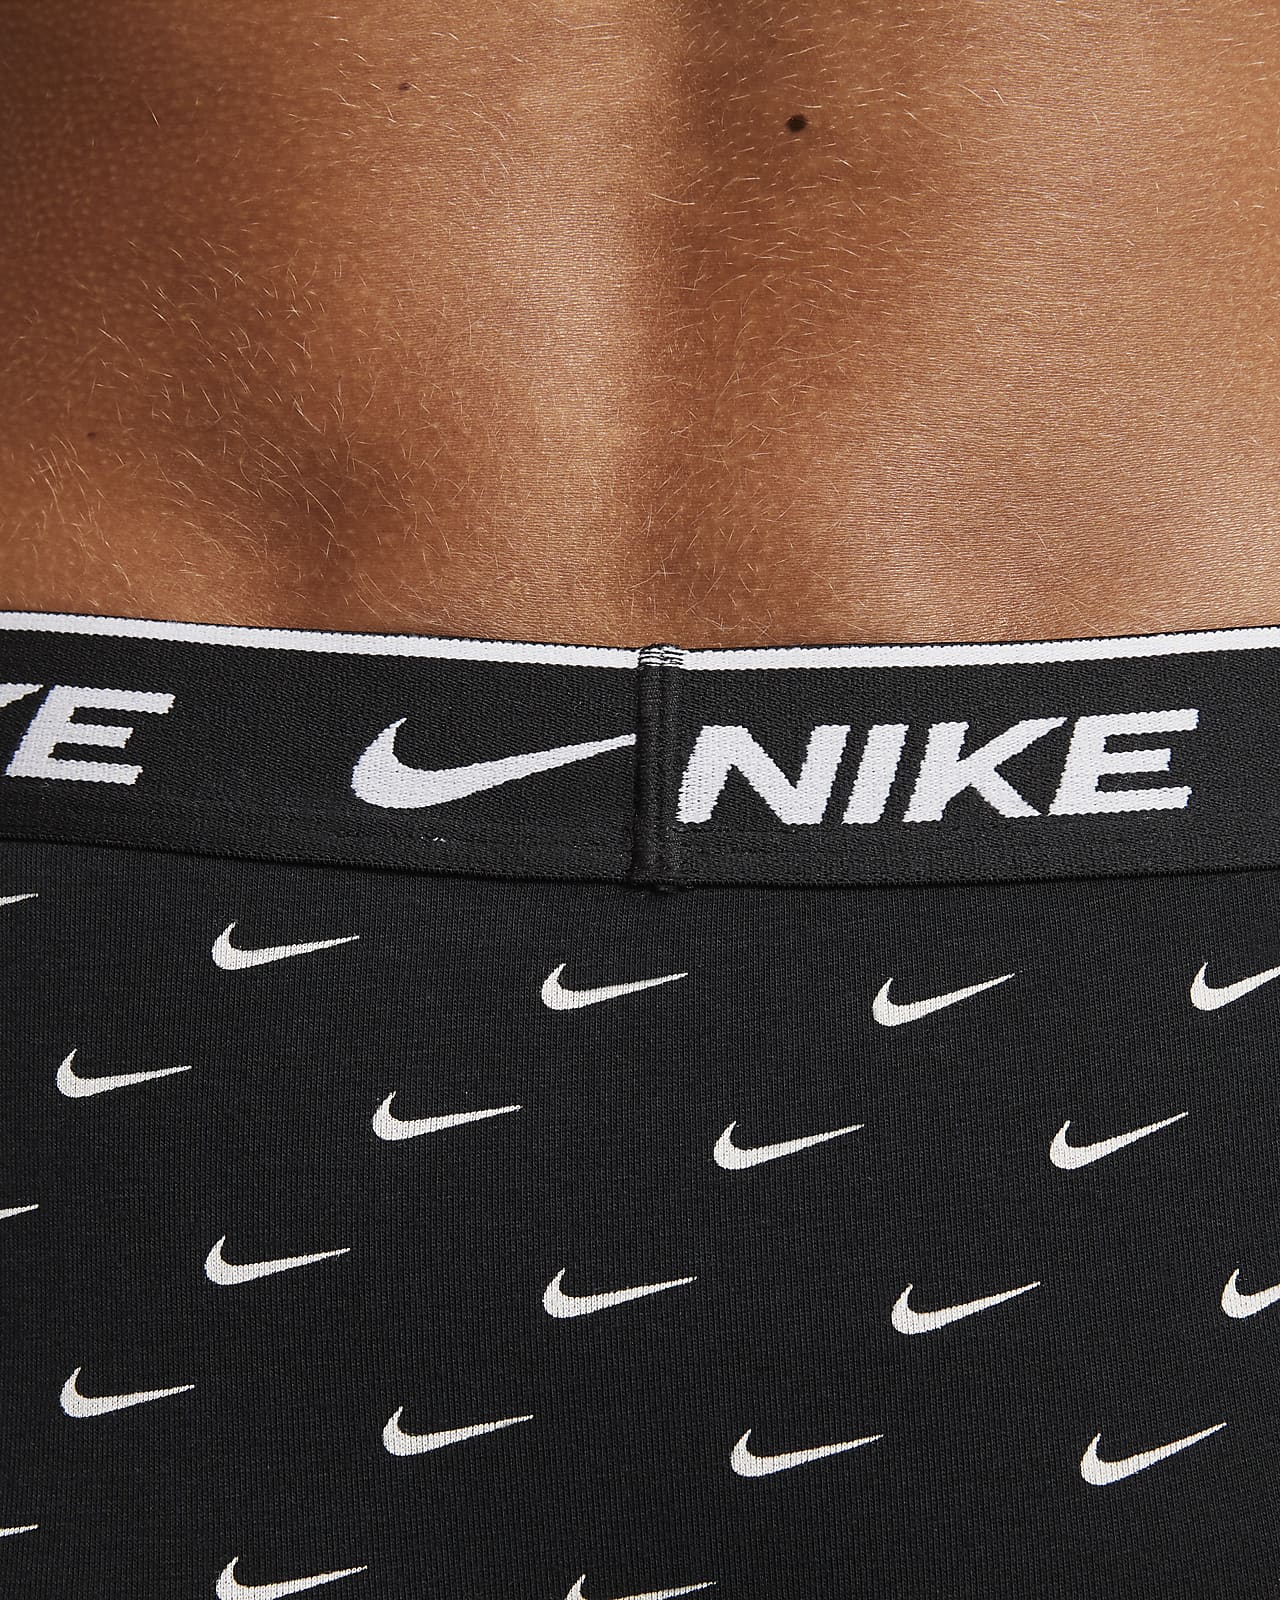 nike boxer brief size chart